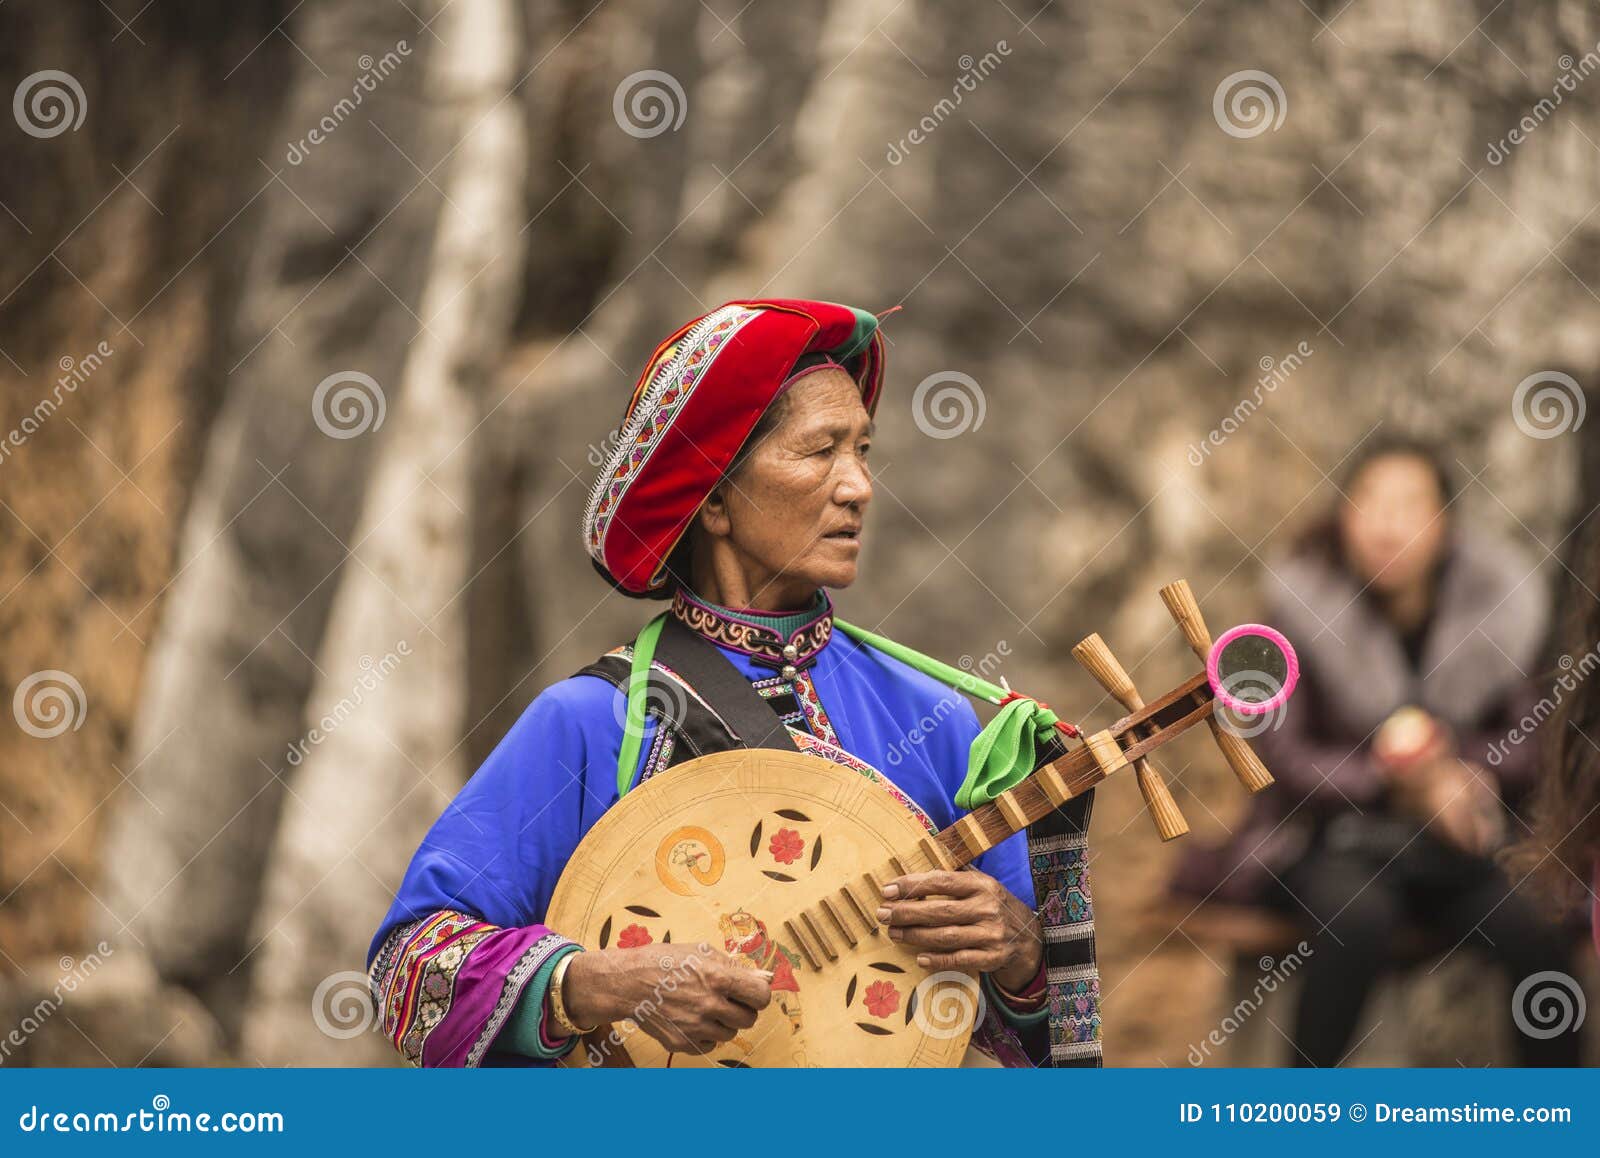 Traditional Musician China Editorial Stock Image Image Of Musician